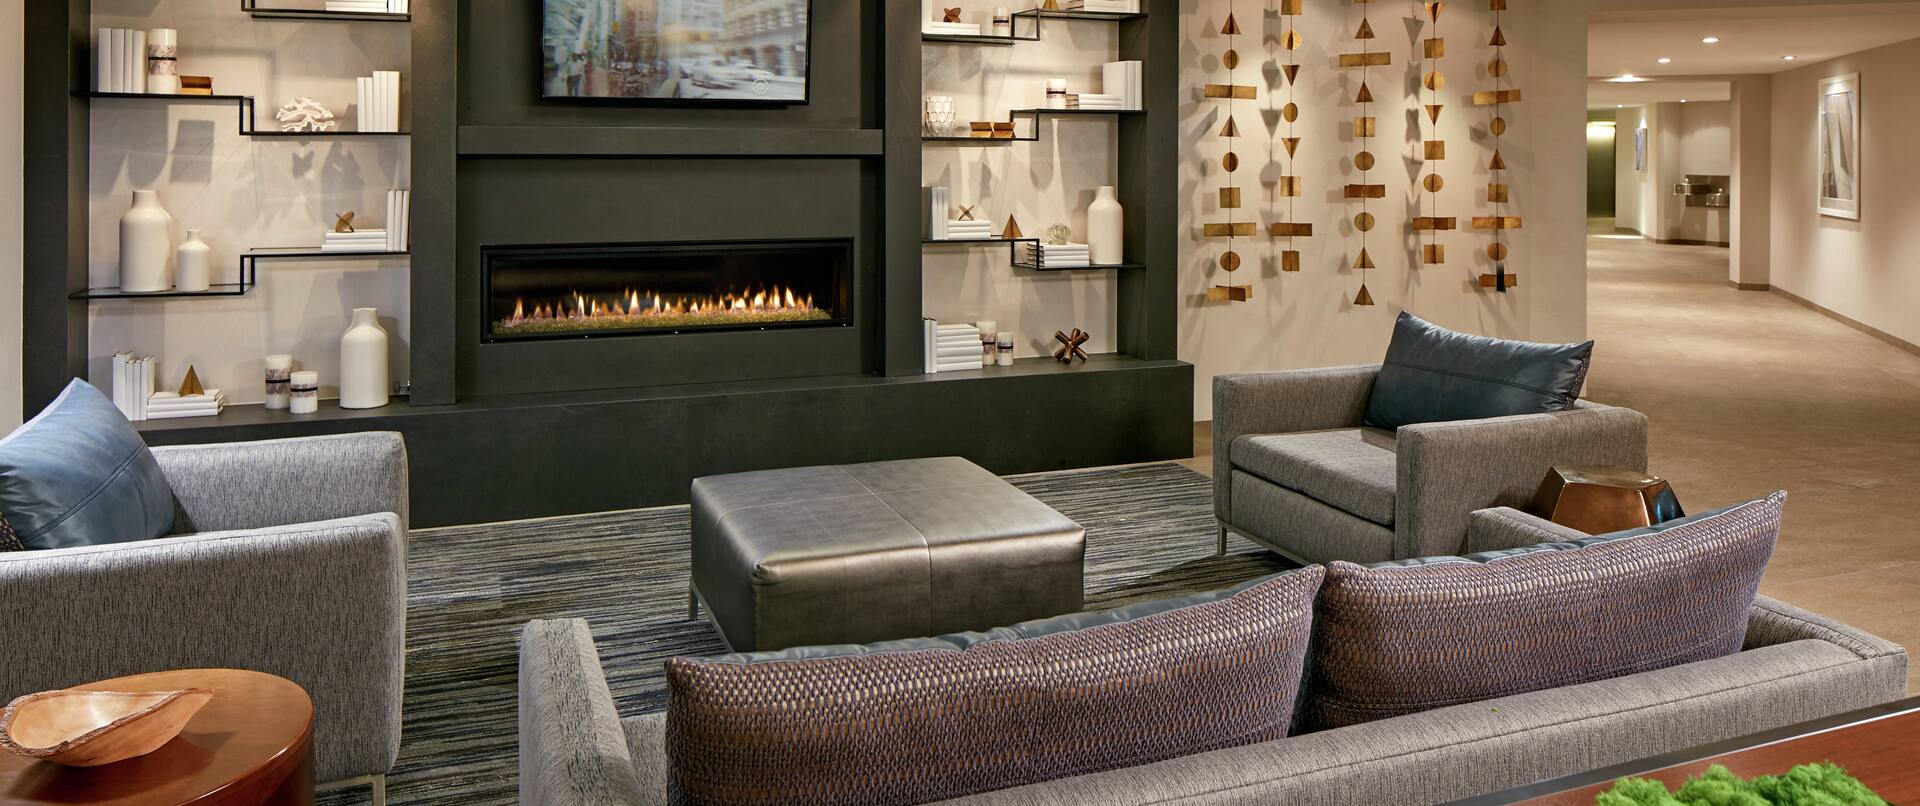 Lobby Sitting Area with Fireplace